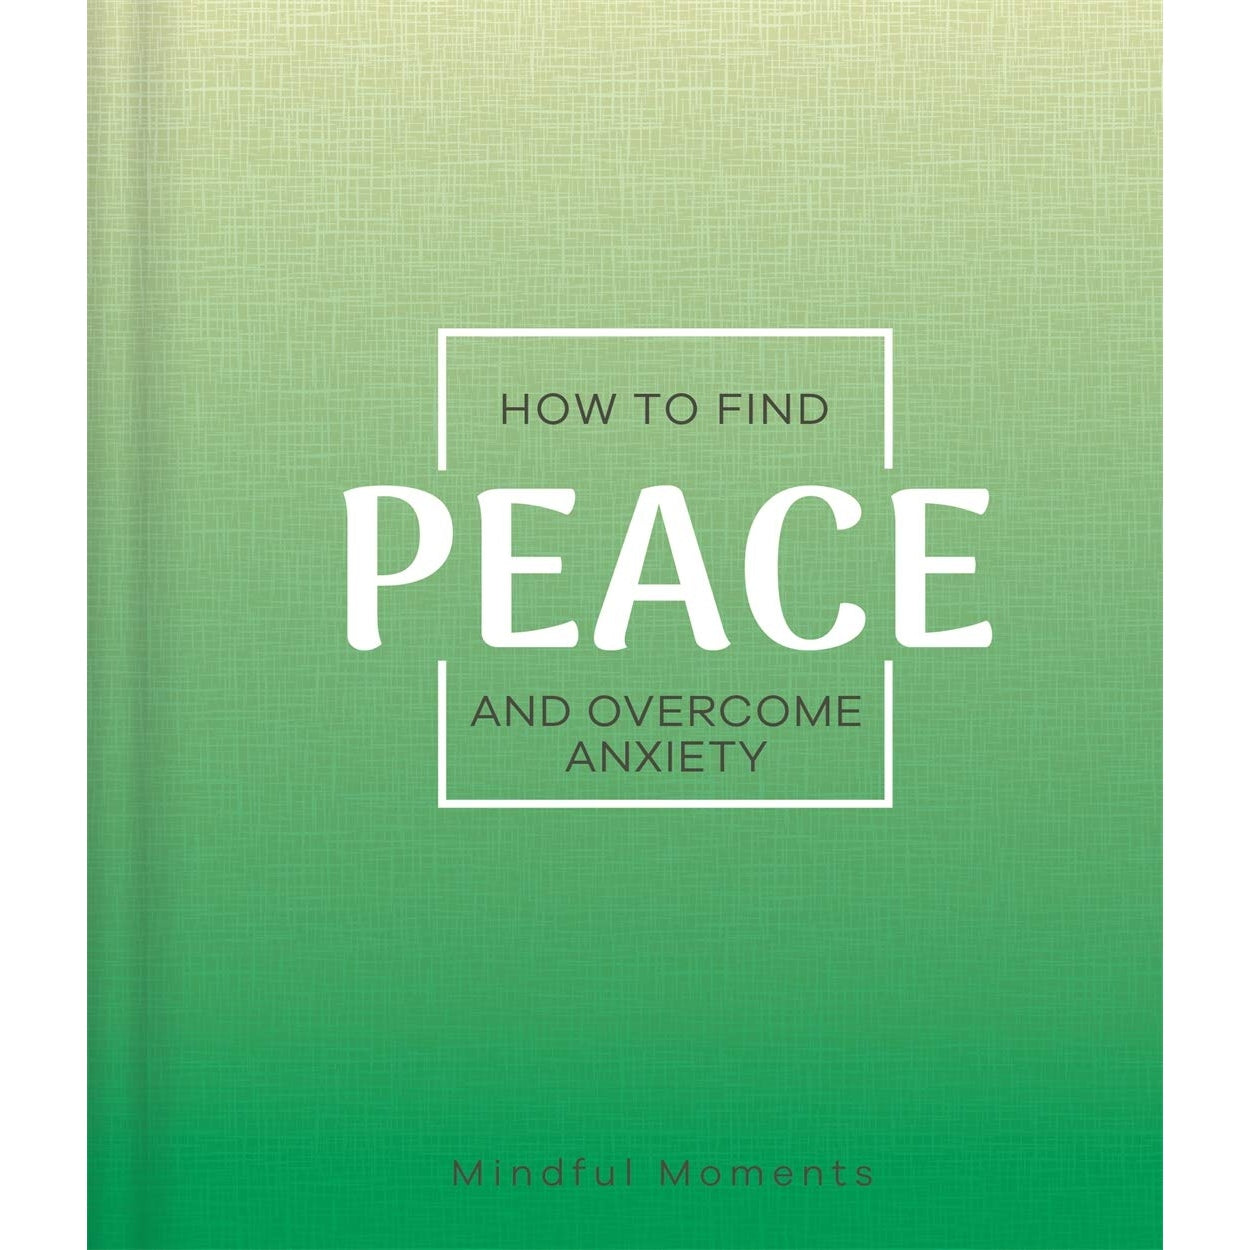 Book | Anxiety Series - How to Find Peace and Overcome Anxiety - Medaid - Lebanon